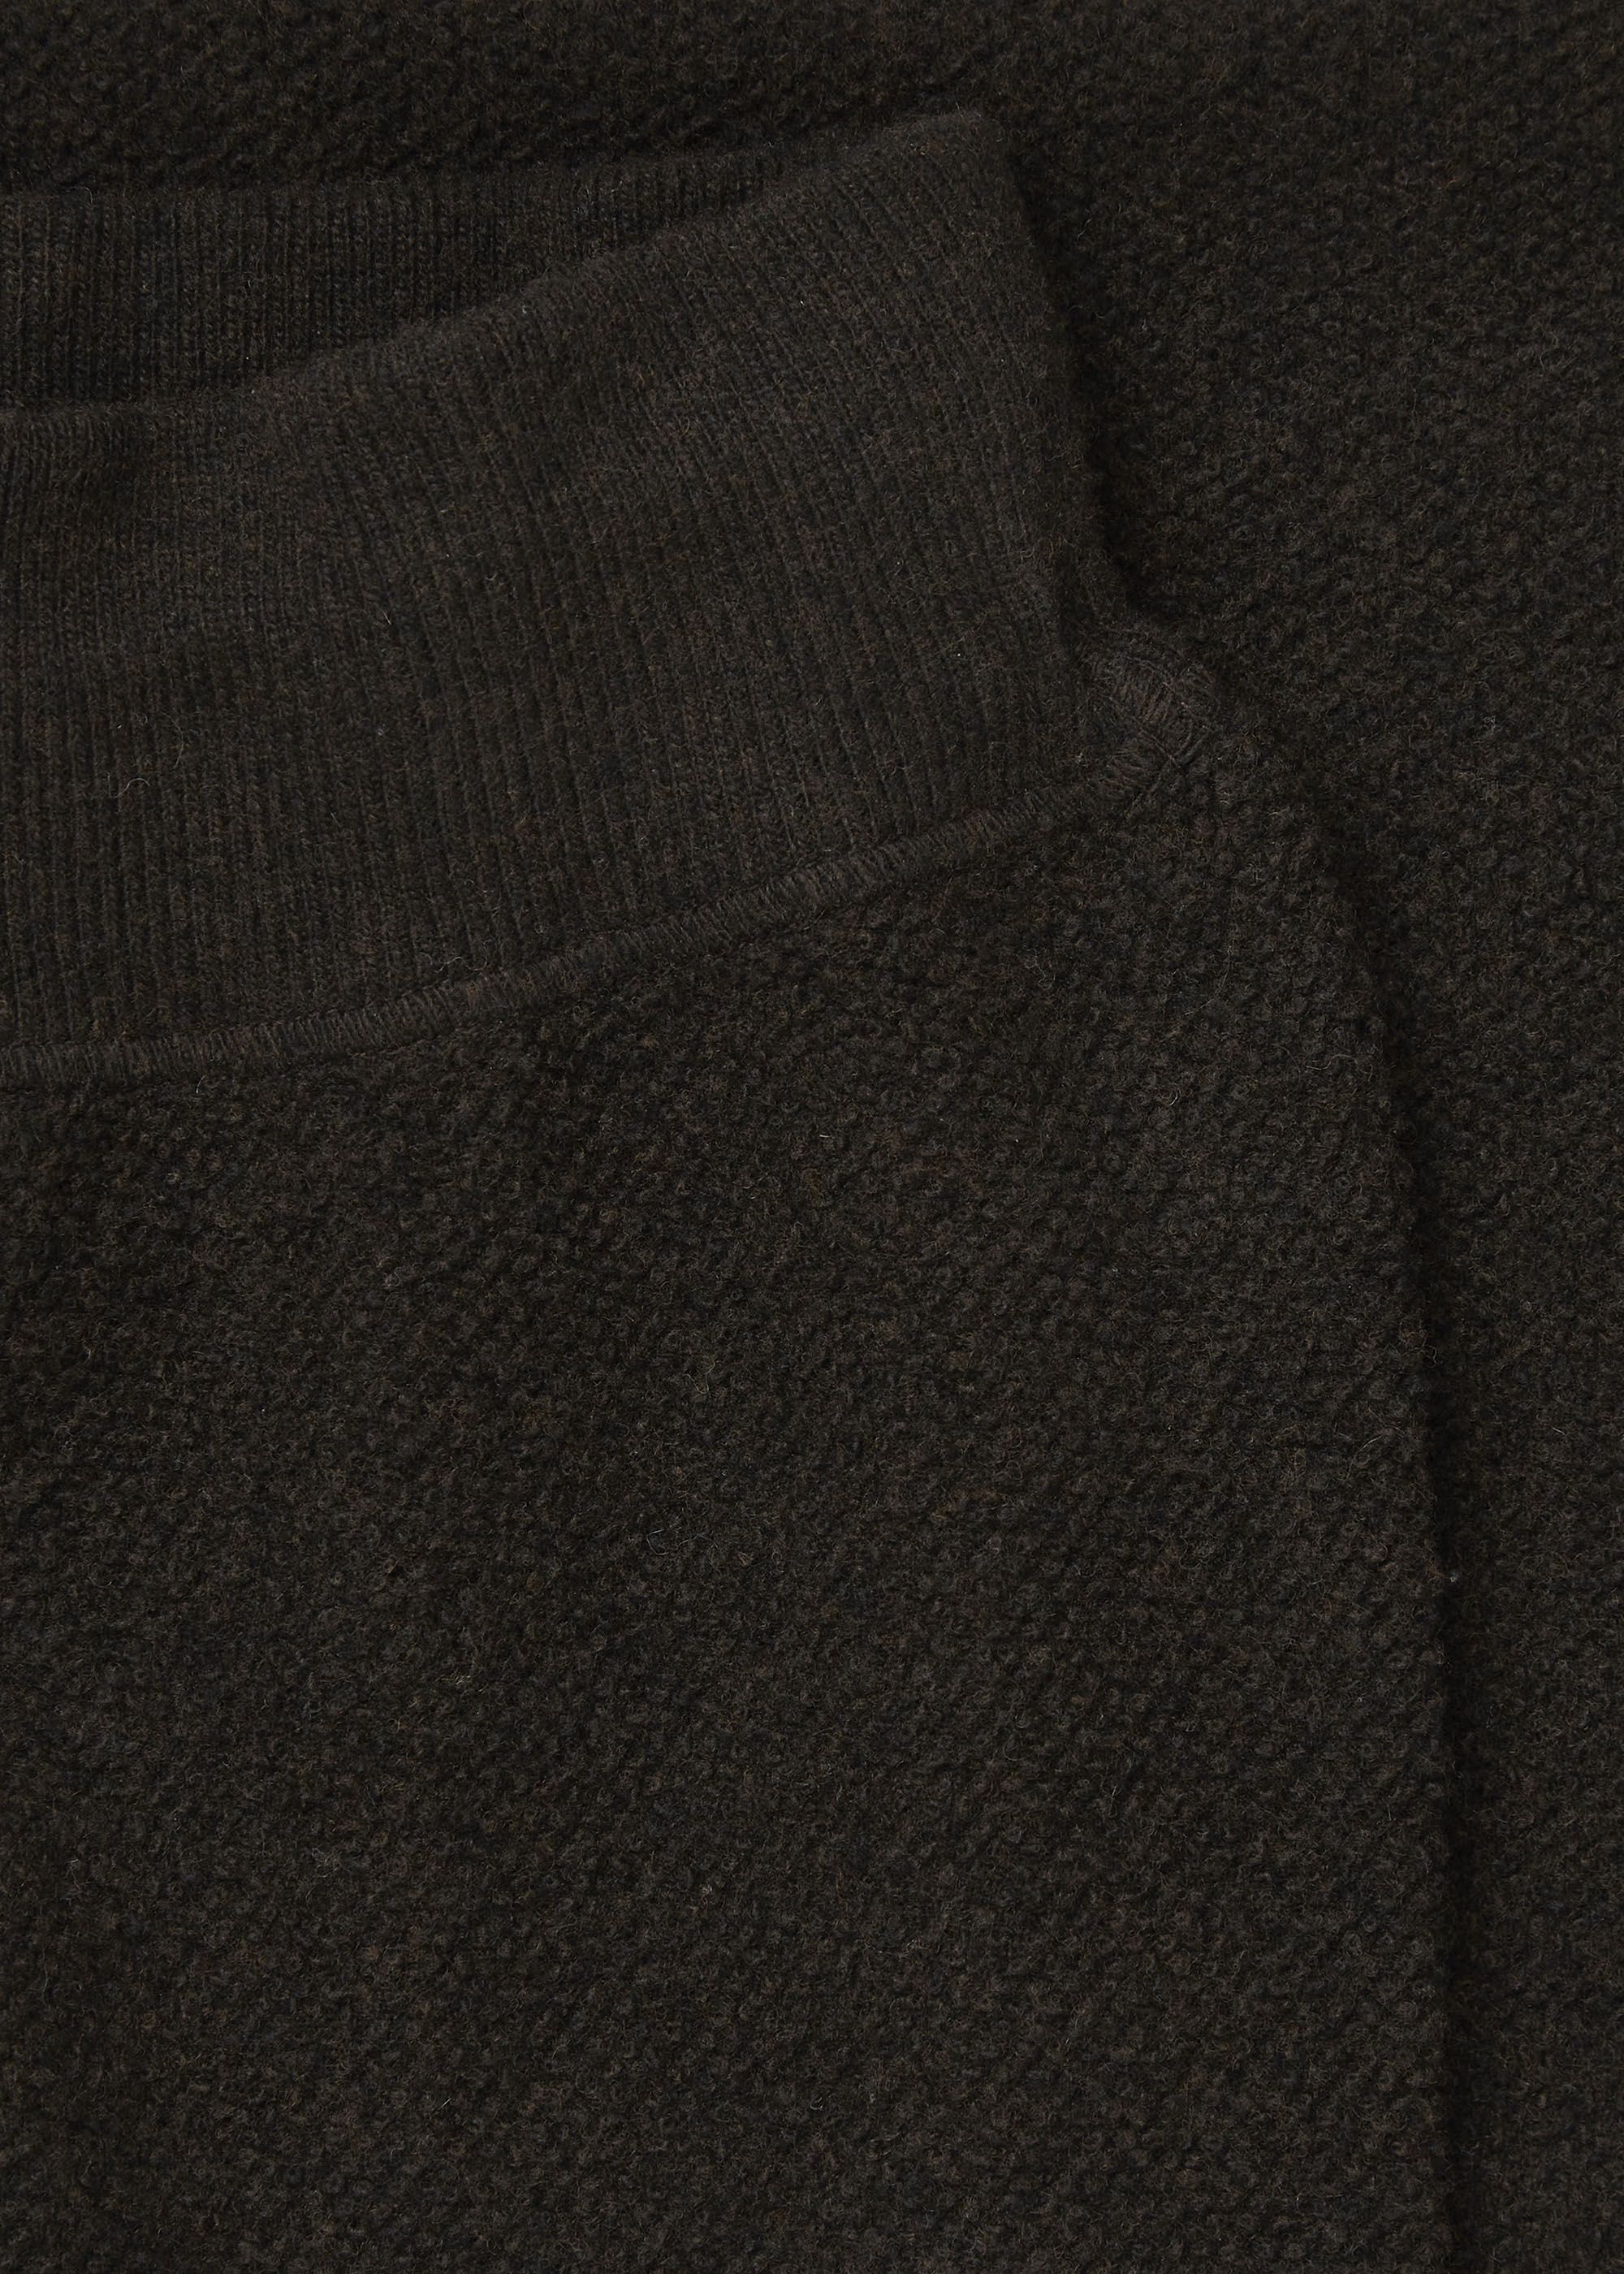 New Arrivals - Loungewear - Carl knitted sweatpants